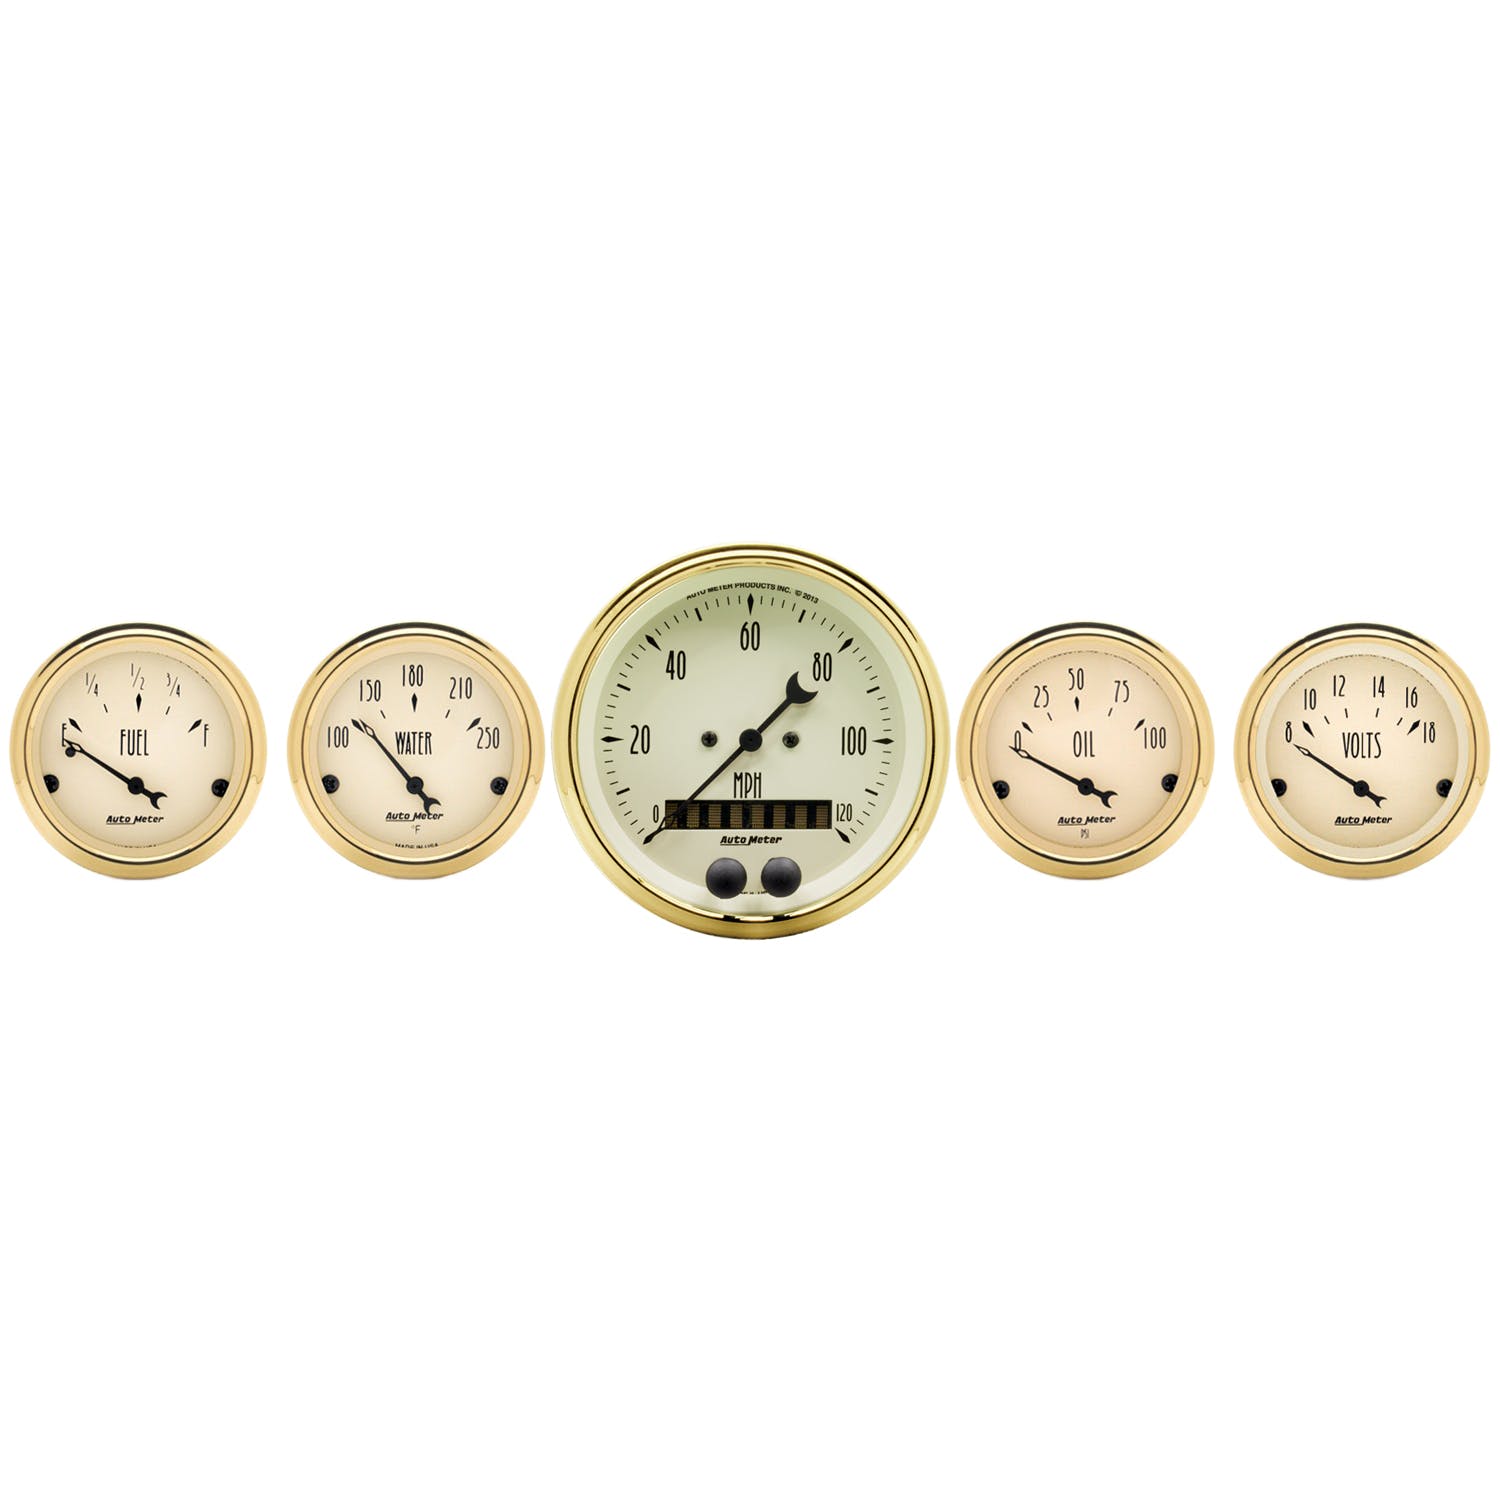 AutoMeter Products 1550 Gauge Kit, 5 Pc., 3 3/8 and 2 1/16, Gps Speedometer, Golden Oldies